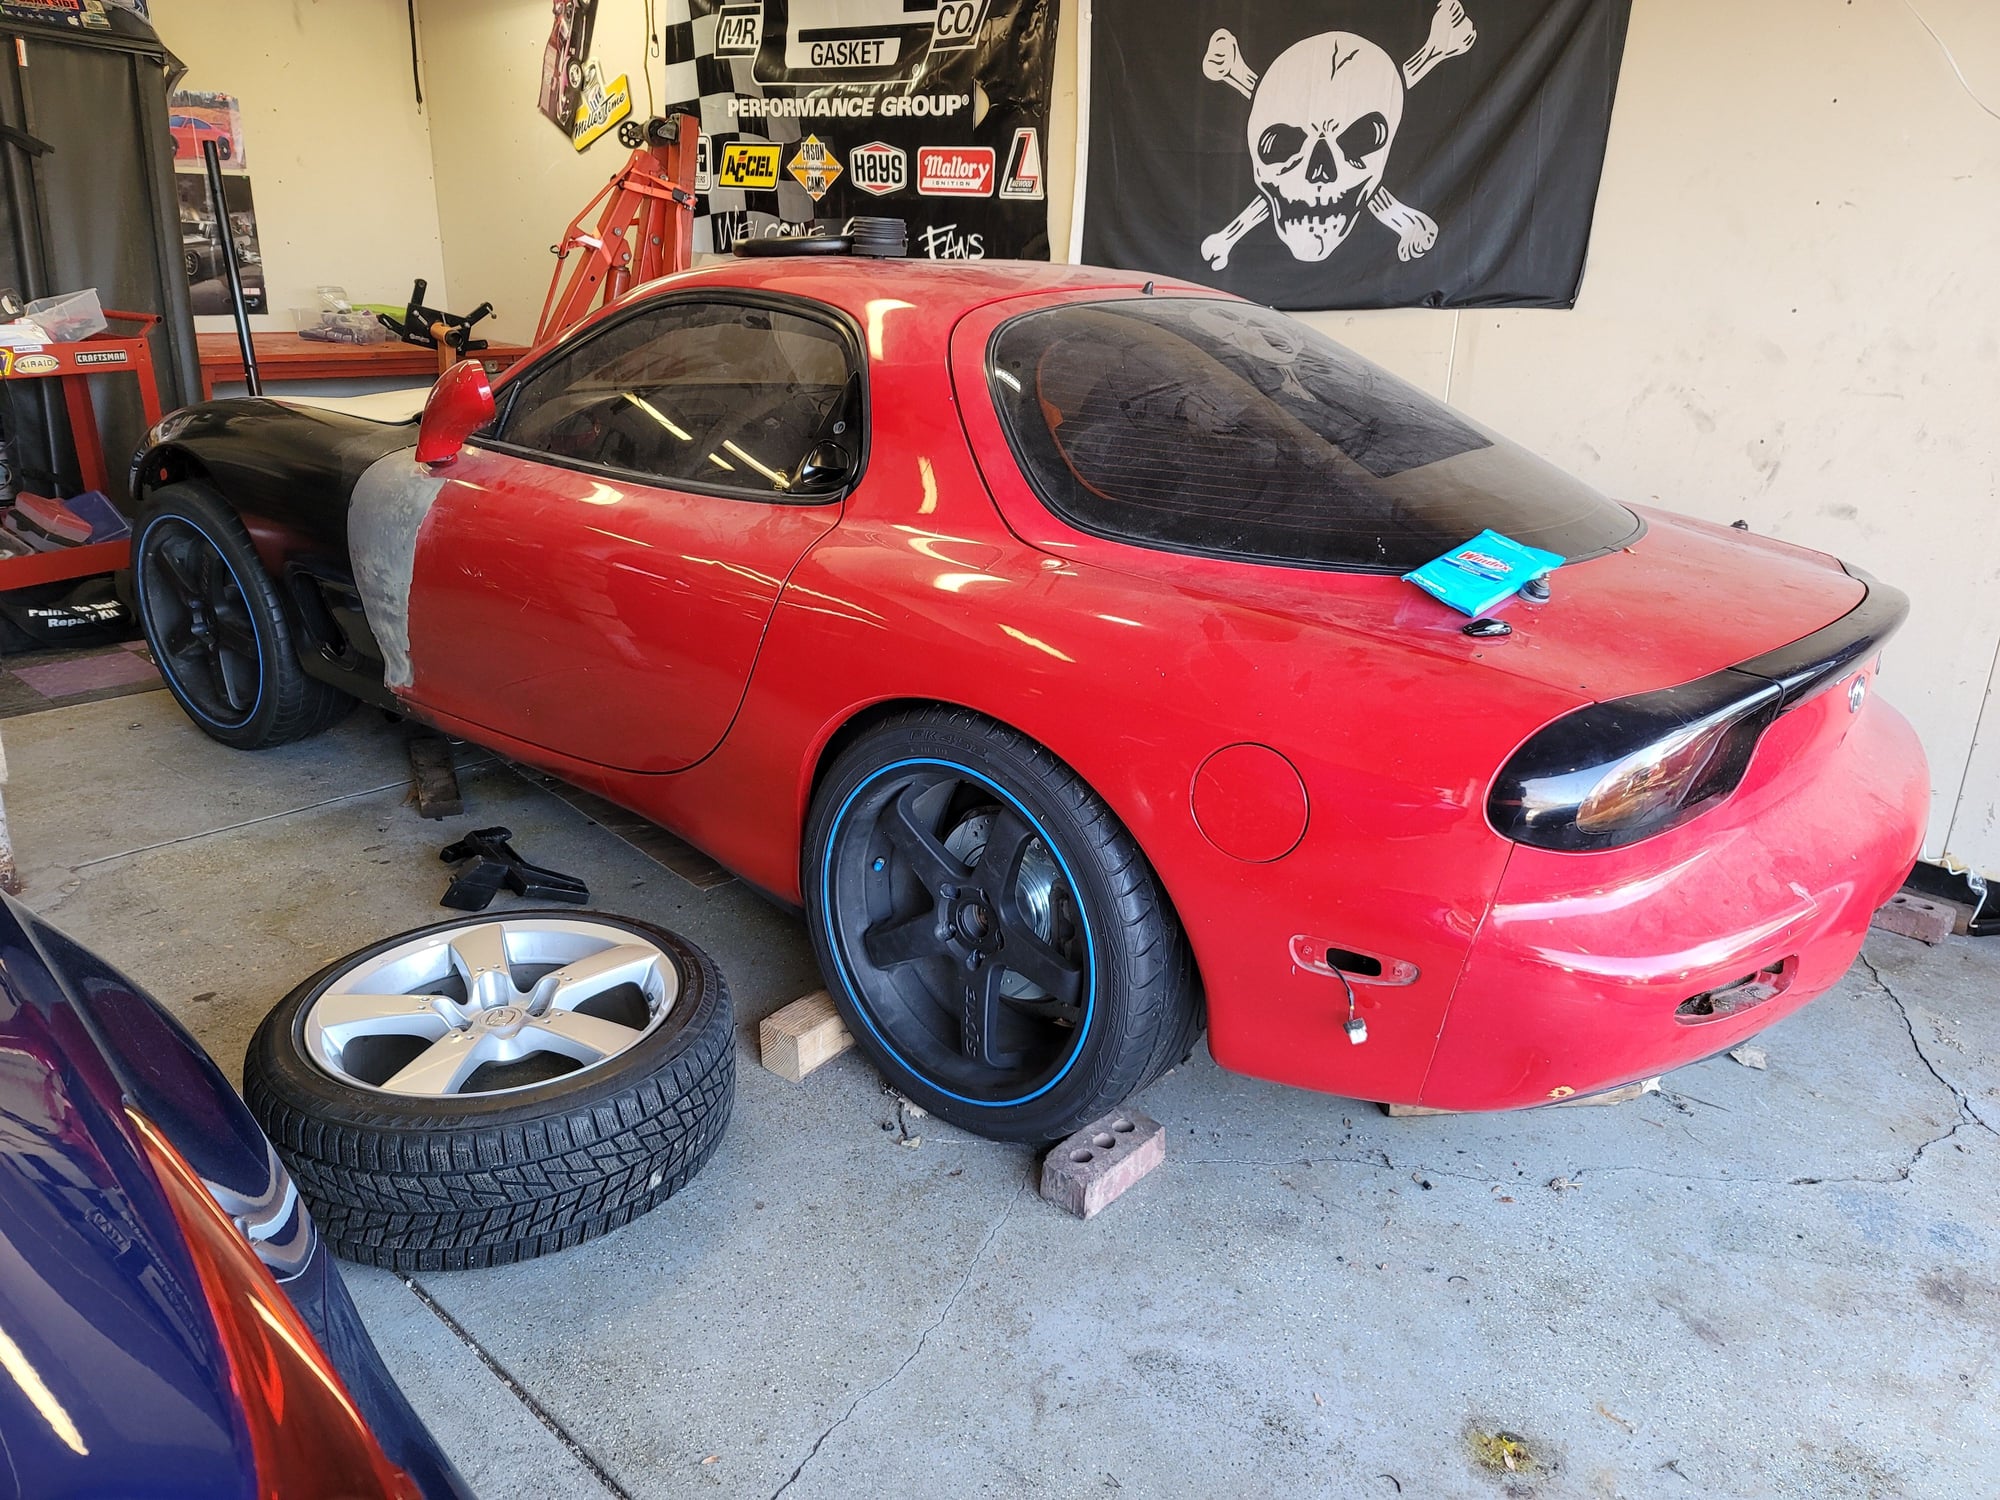 1993 Mazda RX-7 - red 1993 roller with black interior w hinson ls1 subframe $12000 - Used - VIN JM1FD3319P0200552 - Other - 2WD - Manual - Coupe - Red - Omaha, NE 68164, United States